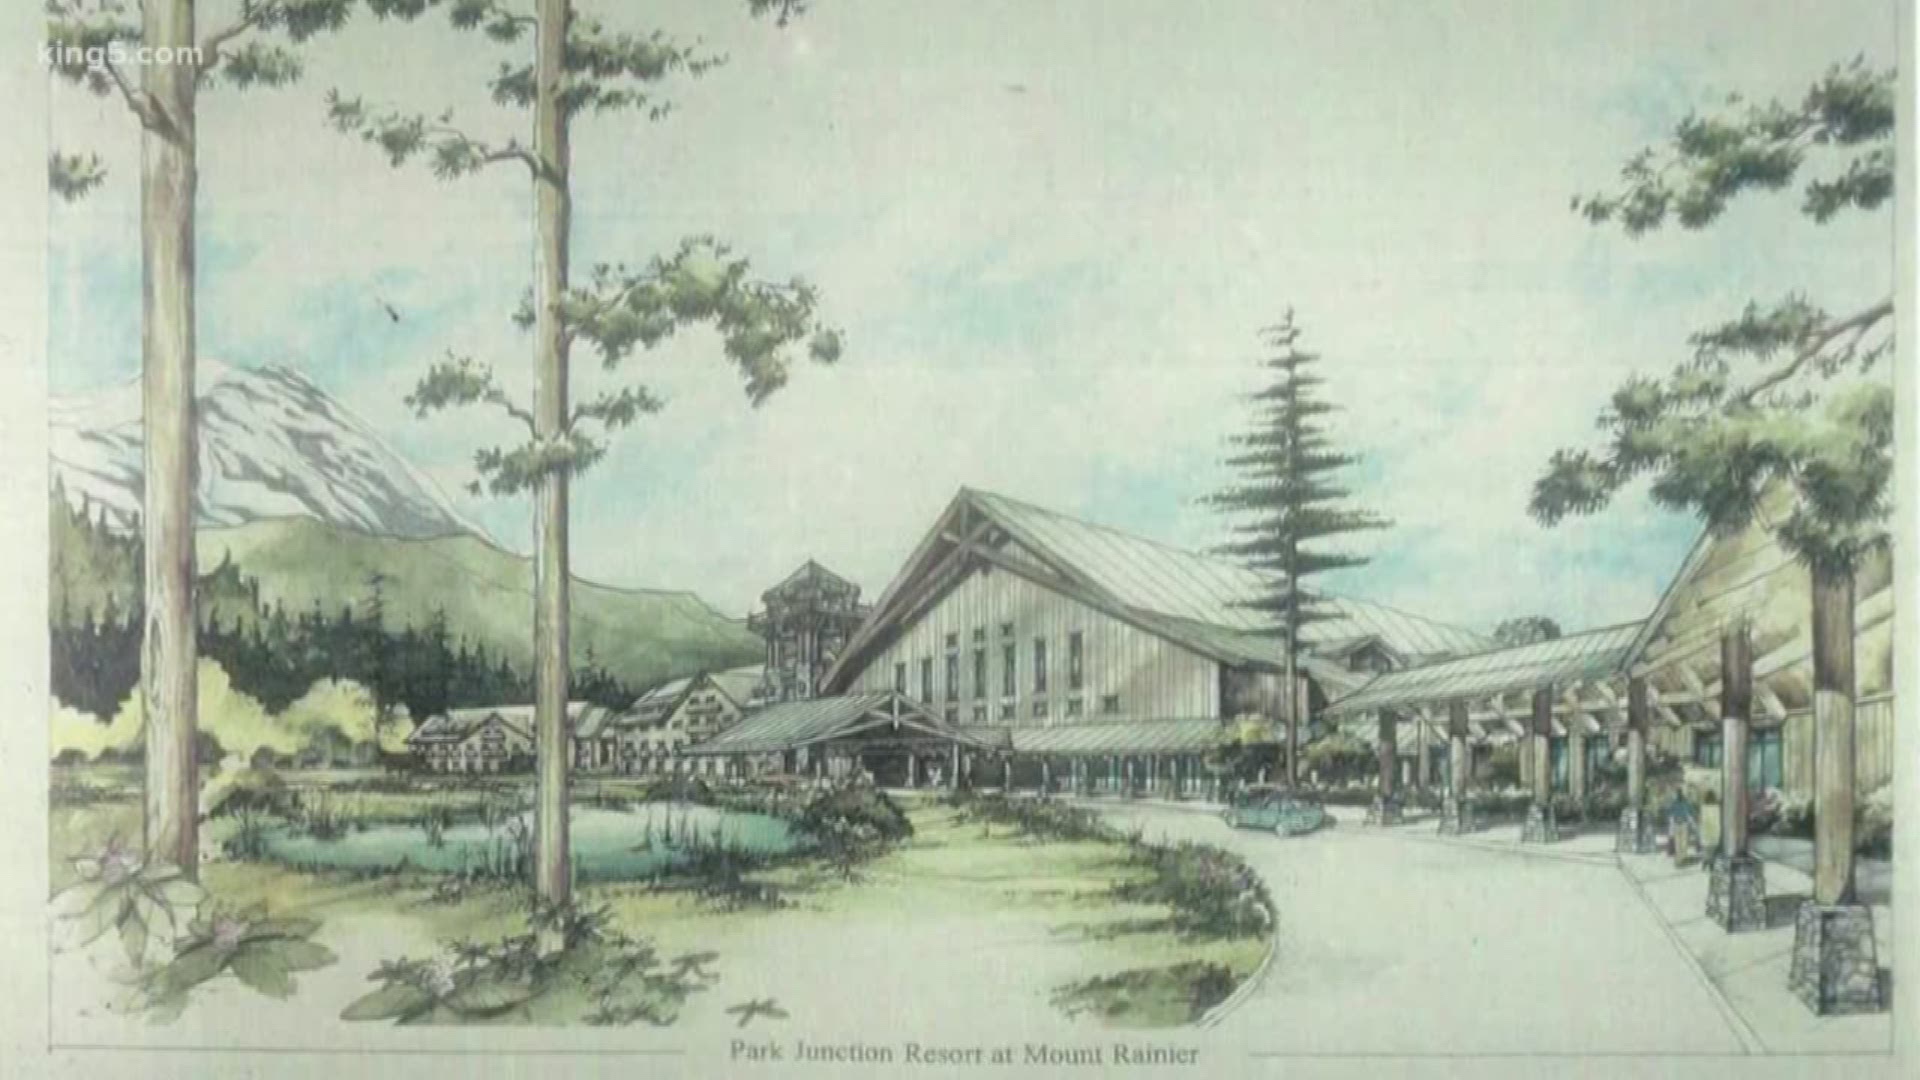 Plans for the resort have been on the table for 20 years, but a new decision could get the project moving again.